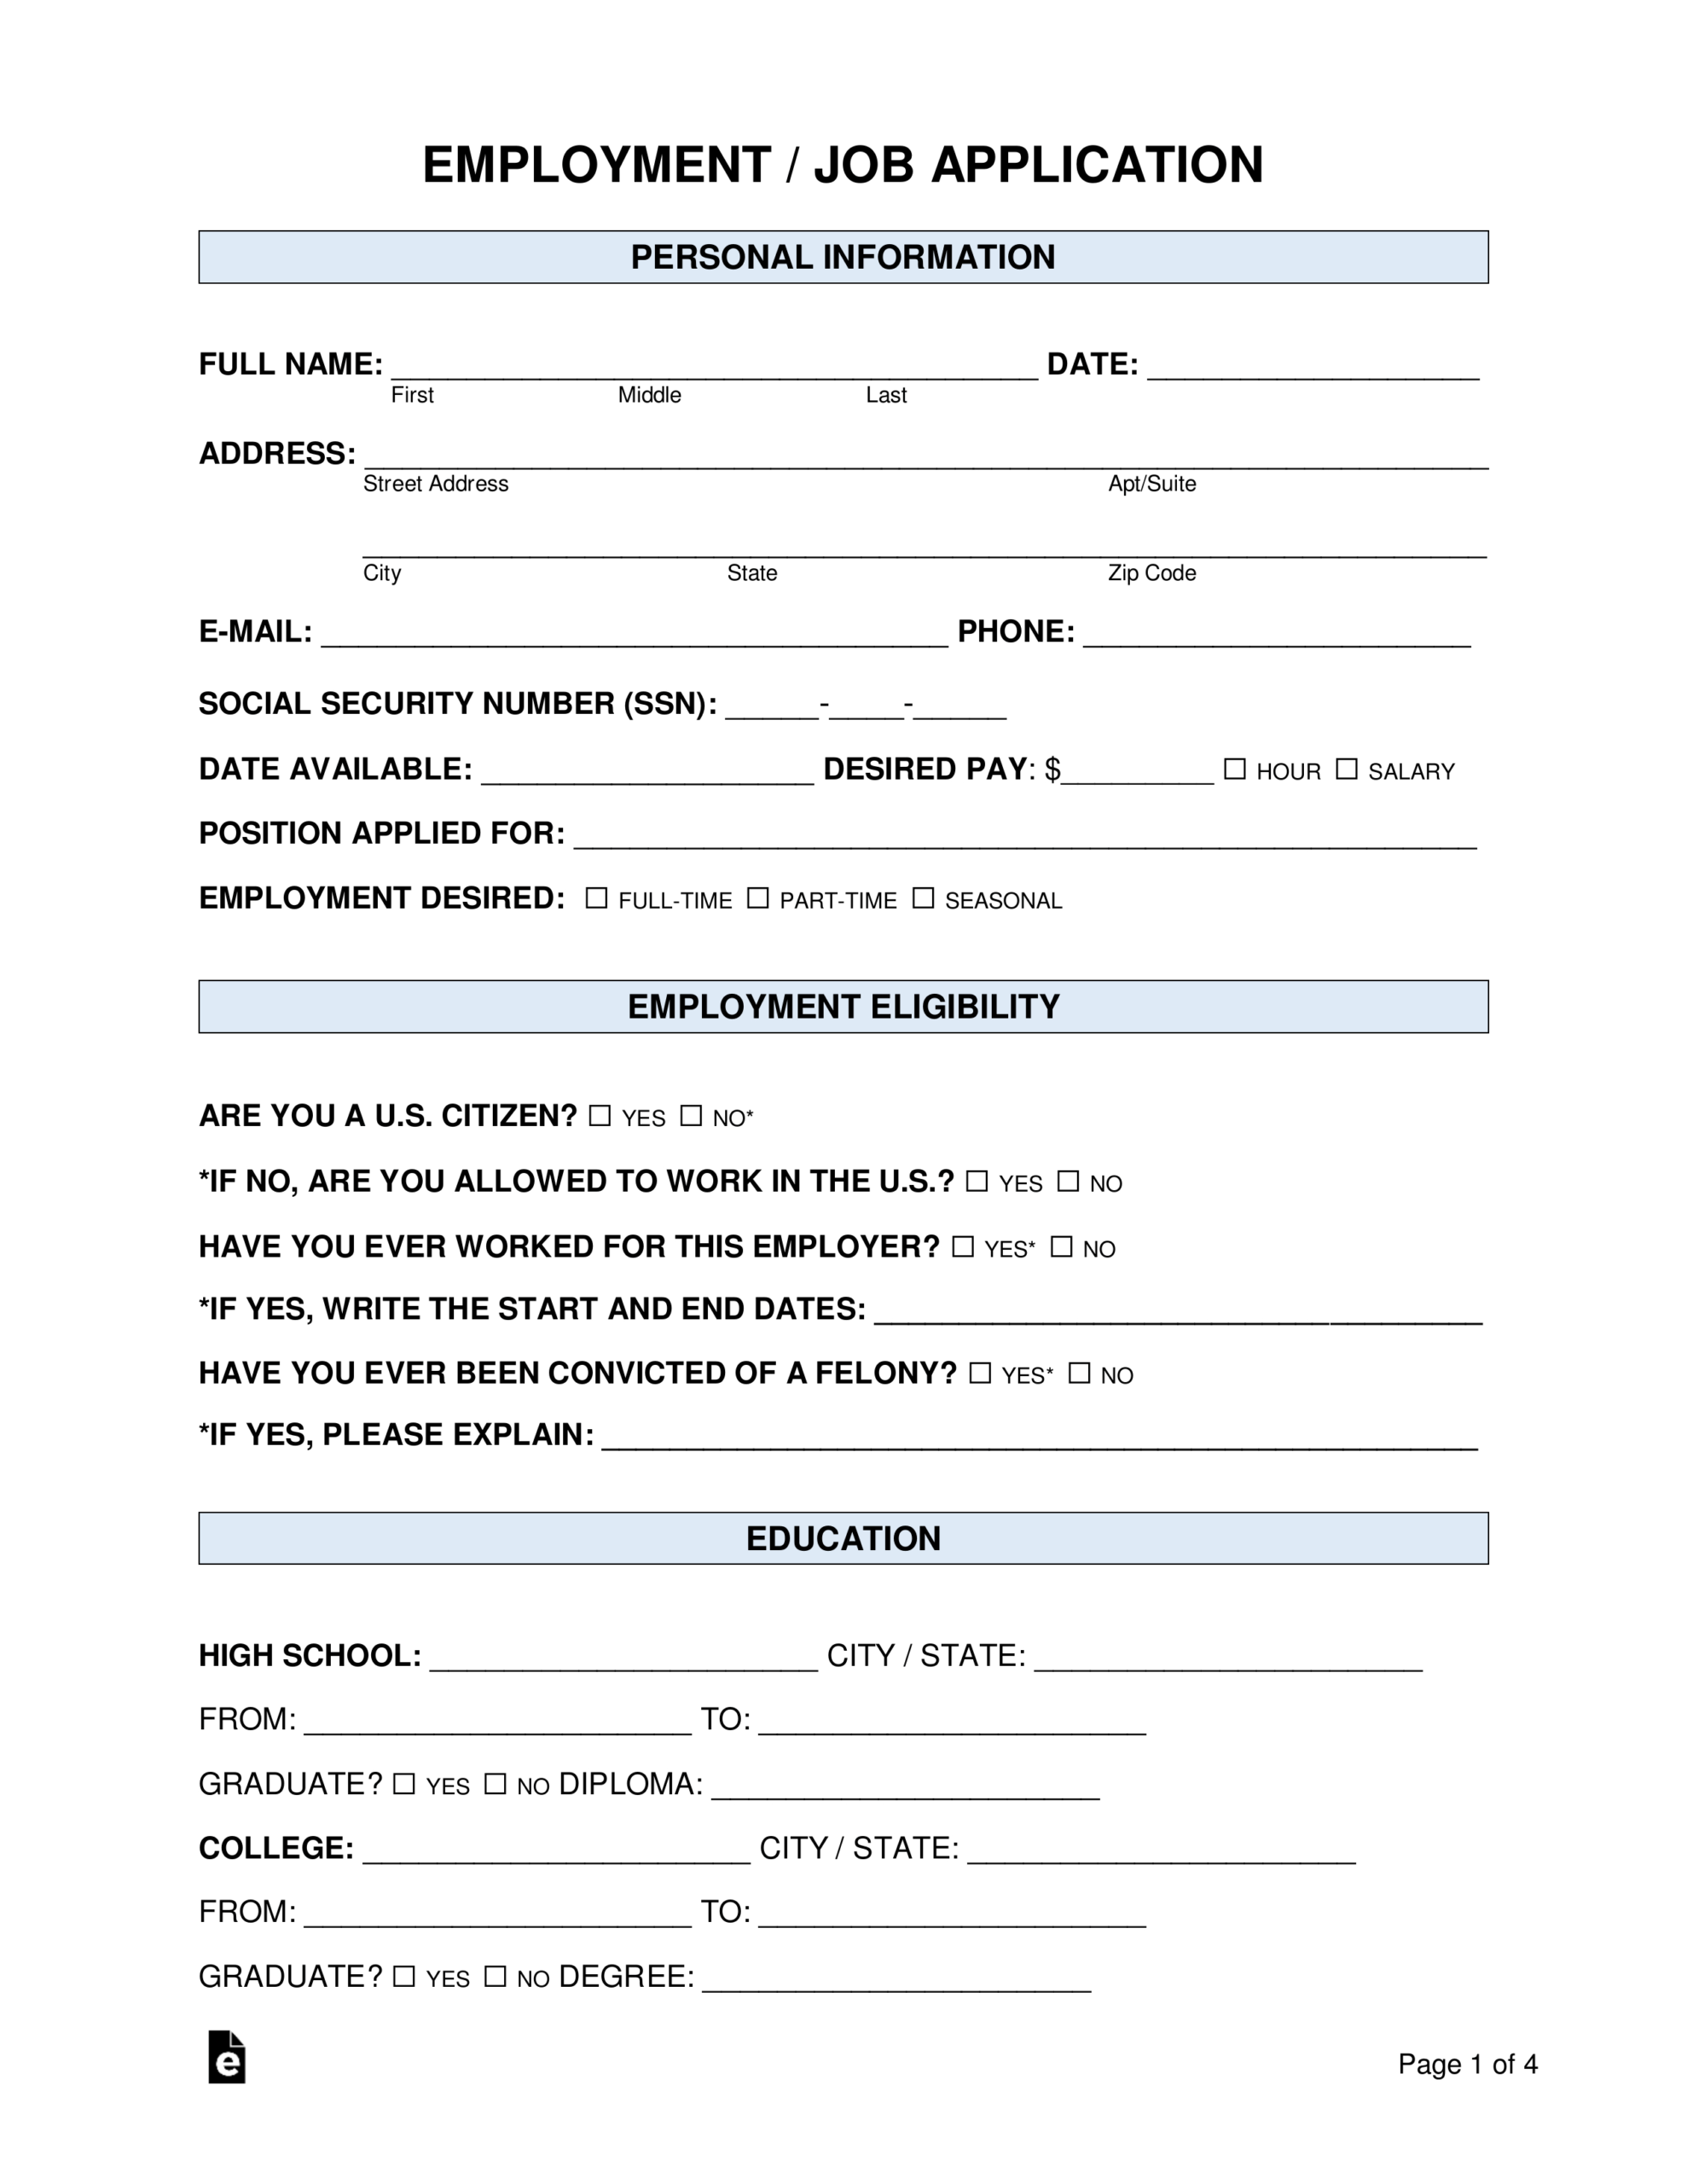 Free Job Application Form - Standard Template - Word | Pdf Intended For Employment Application Template Microsoft Word